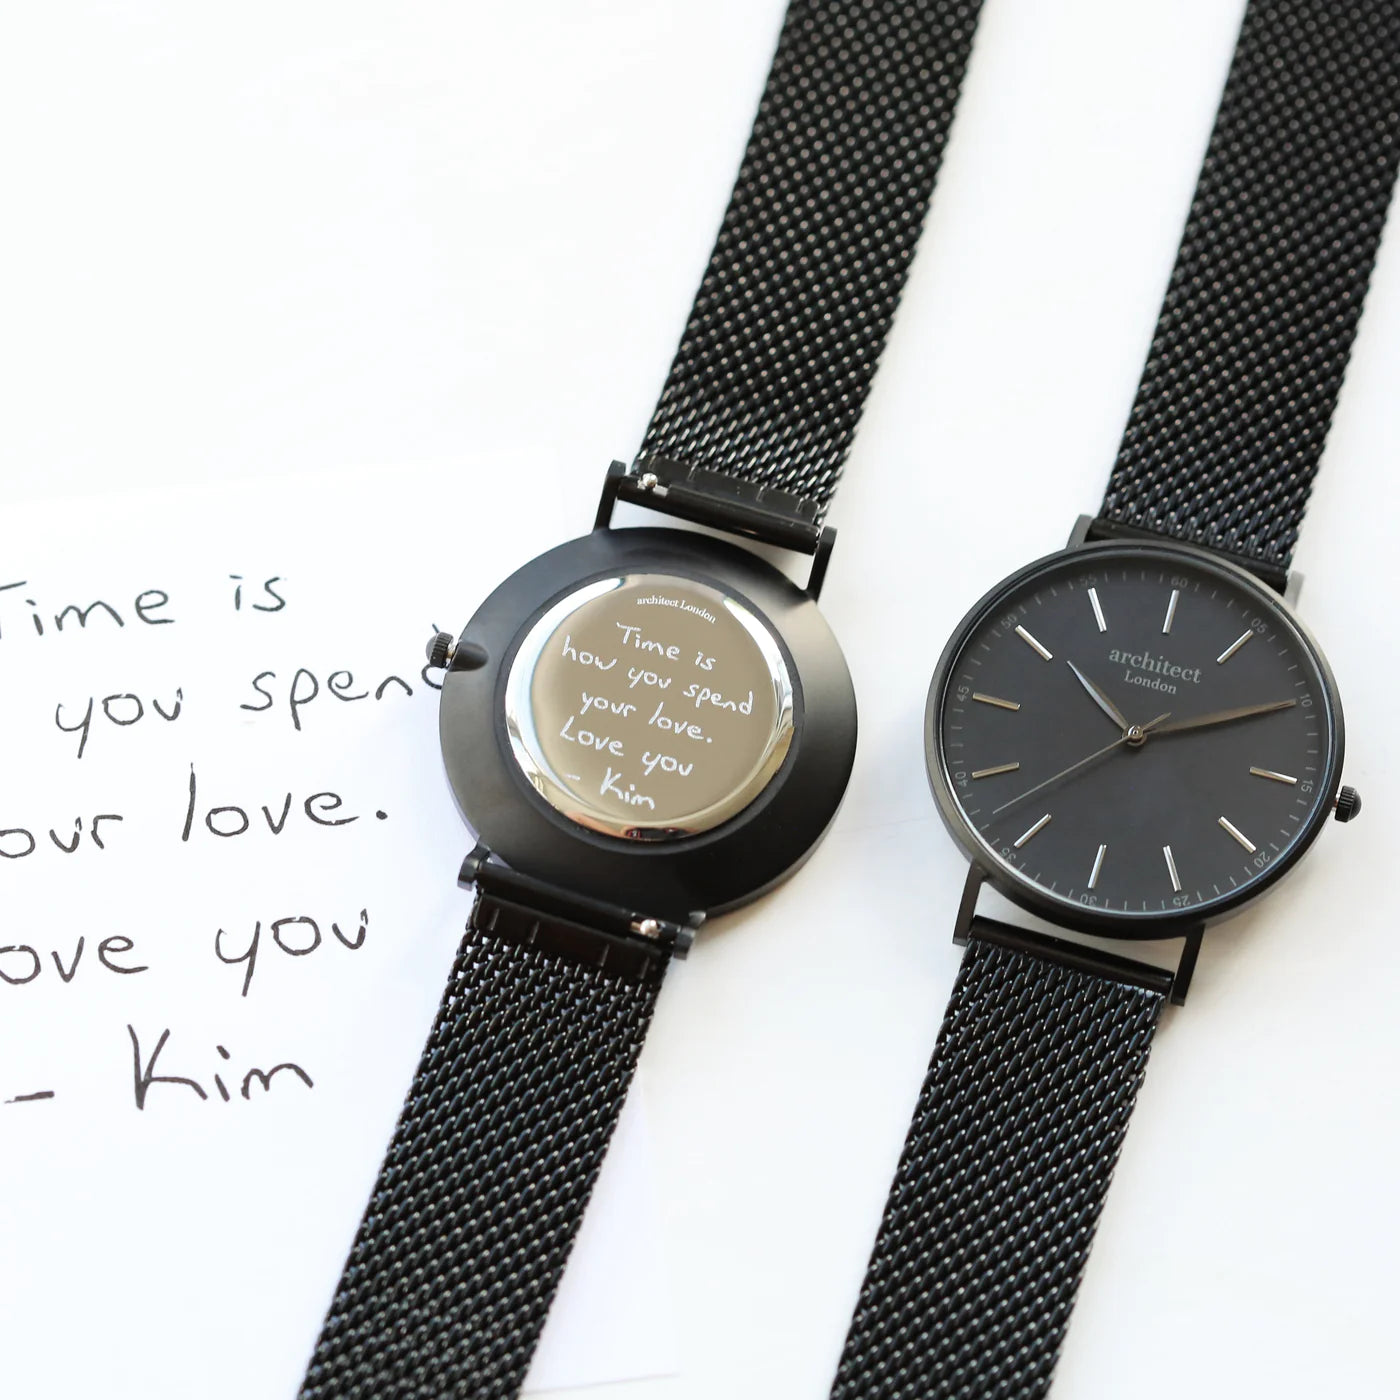 Image of a men's black Architect watch wtih a black face and black mesh strap. The back of the watch can be engraved with your own handwritten message or drawing.